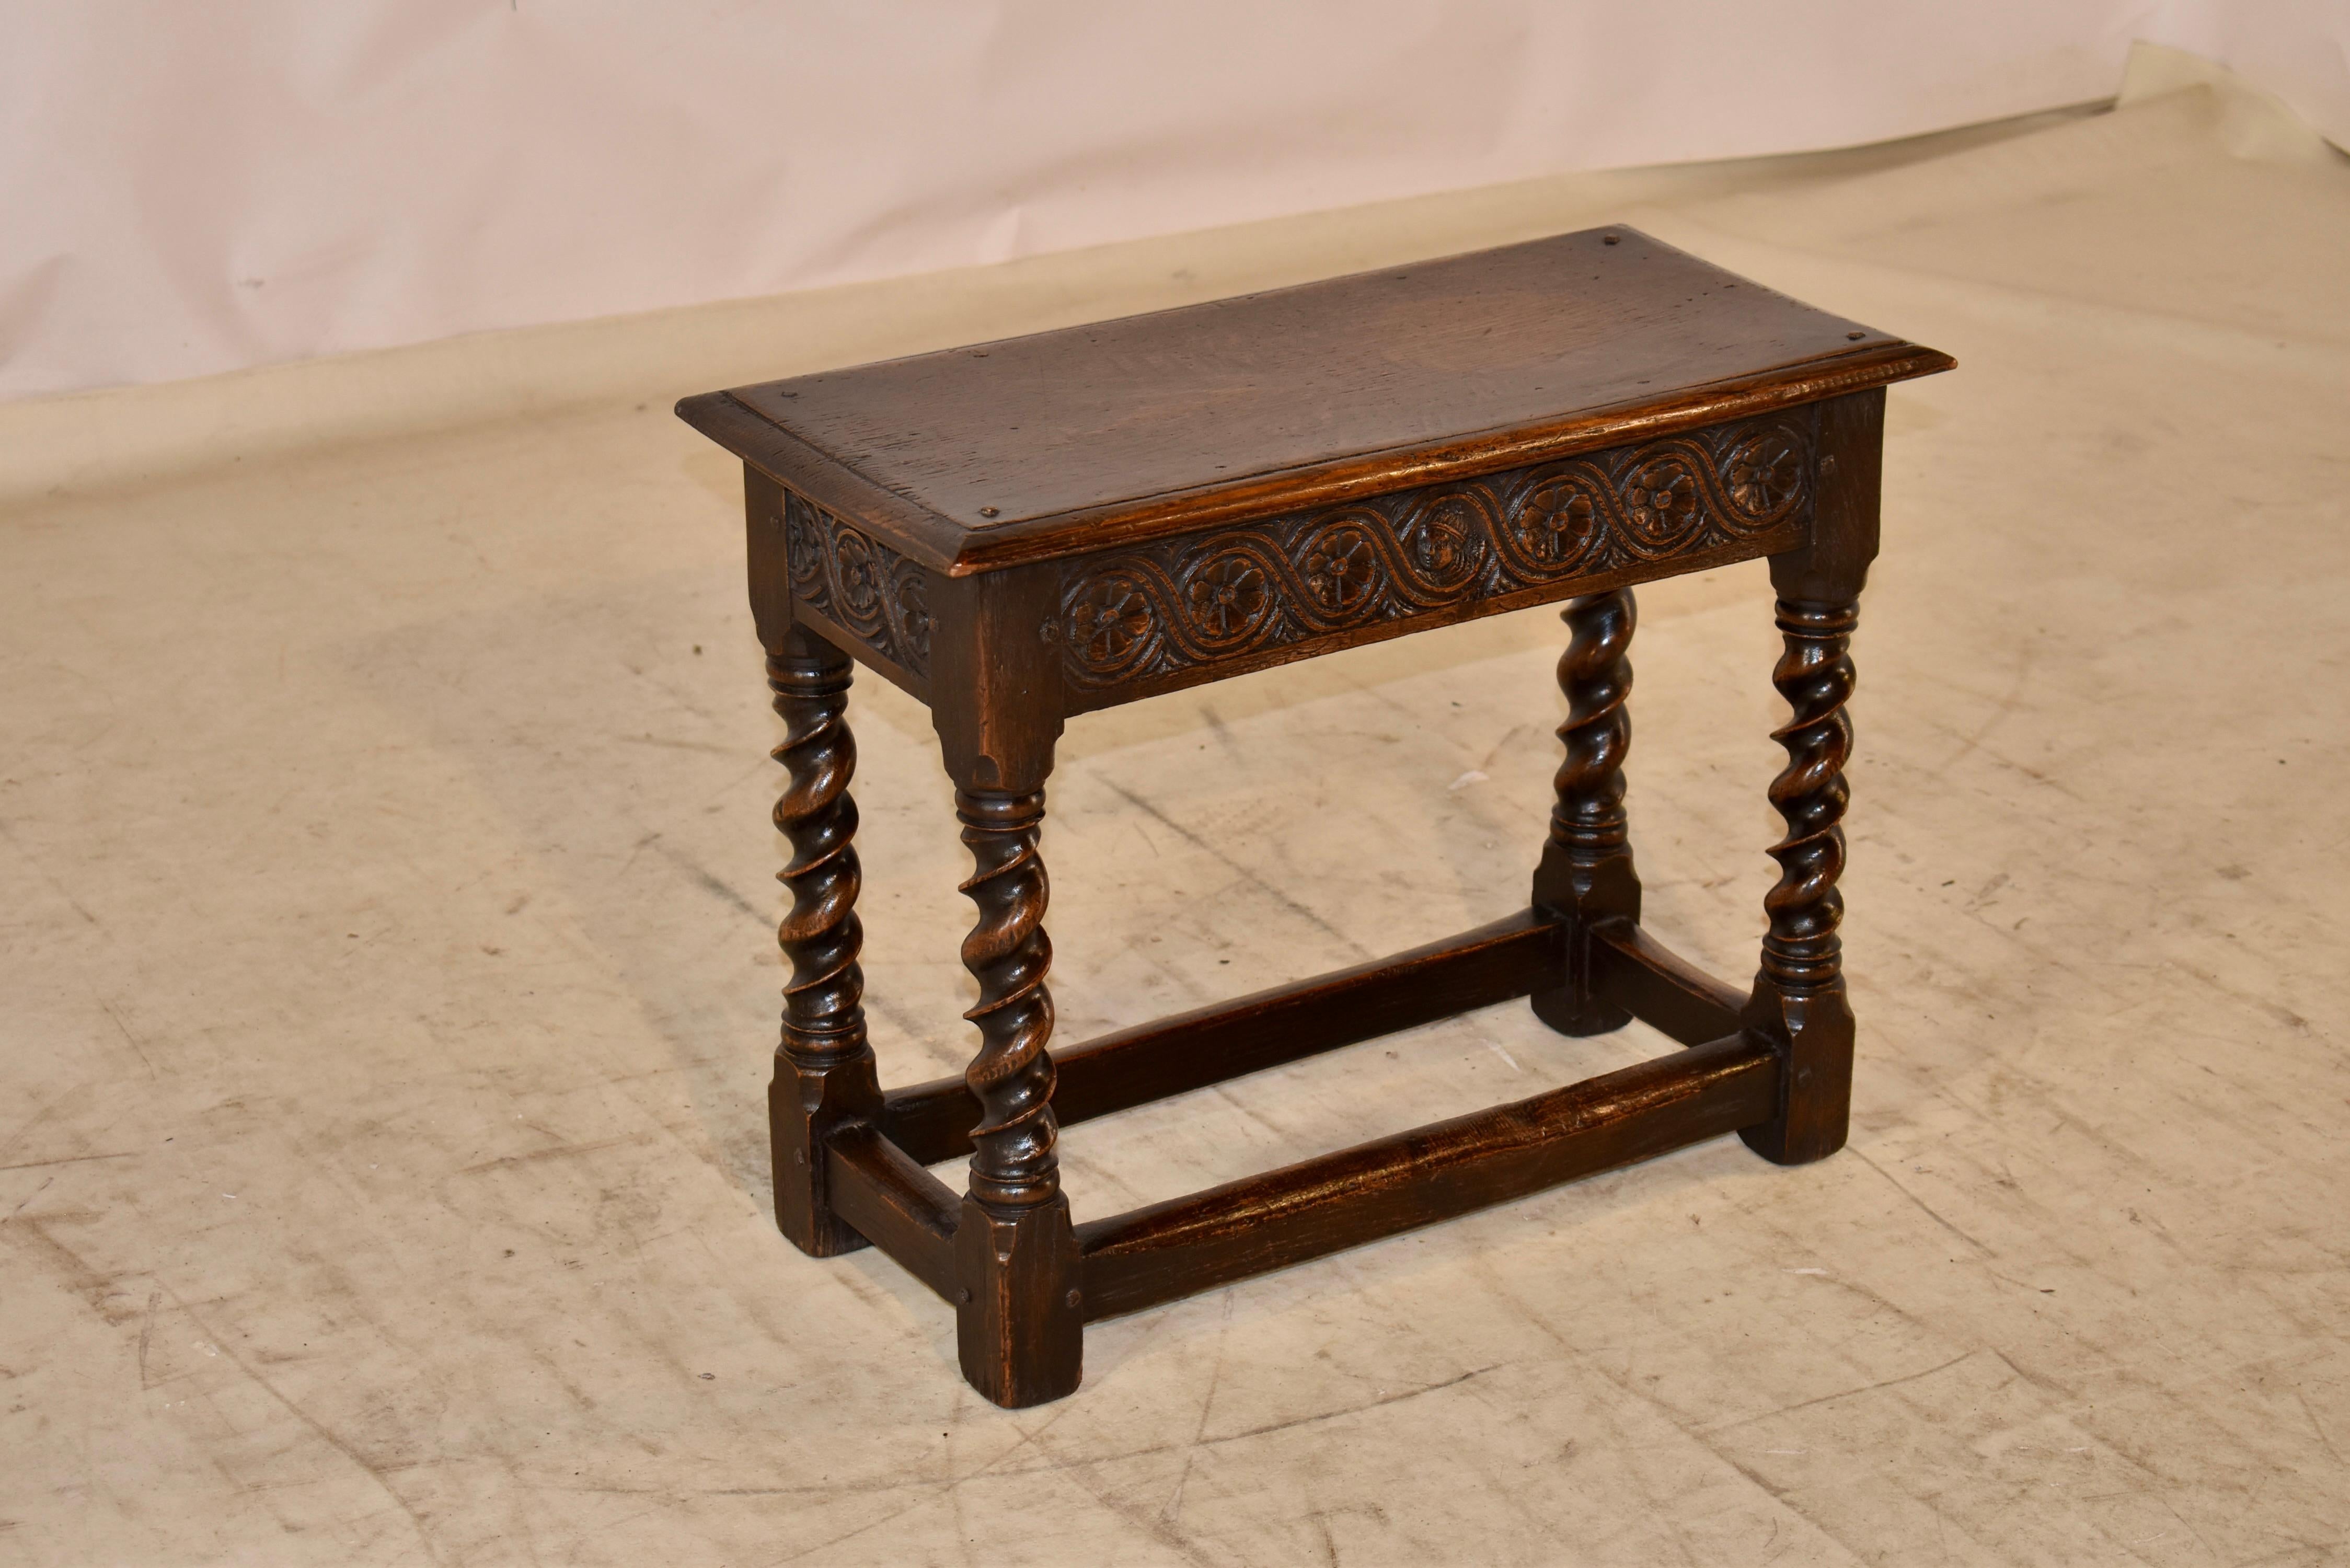 Hand-Carved 19th Century English Oak Joint Stool For Sale